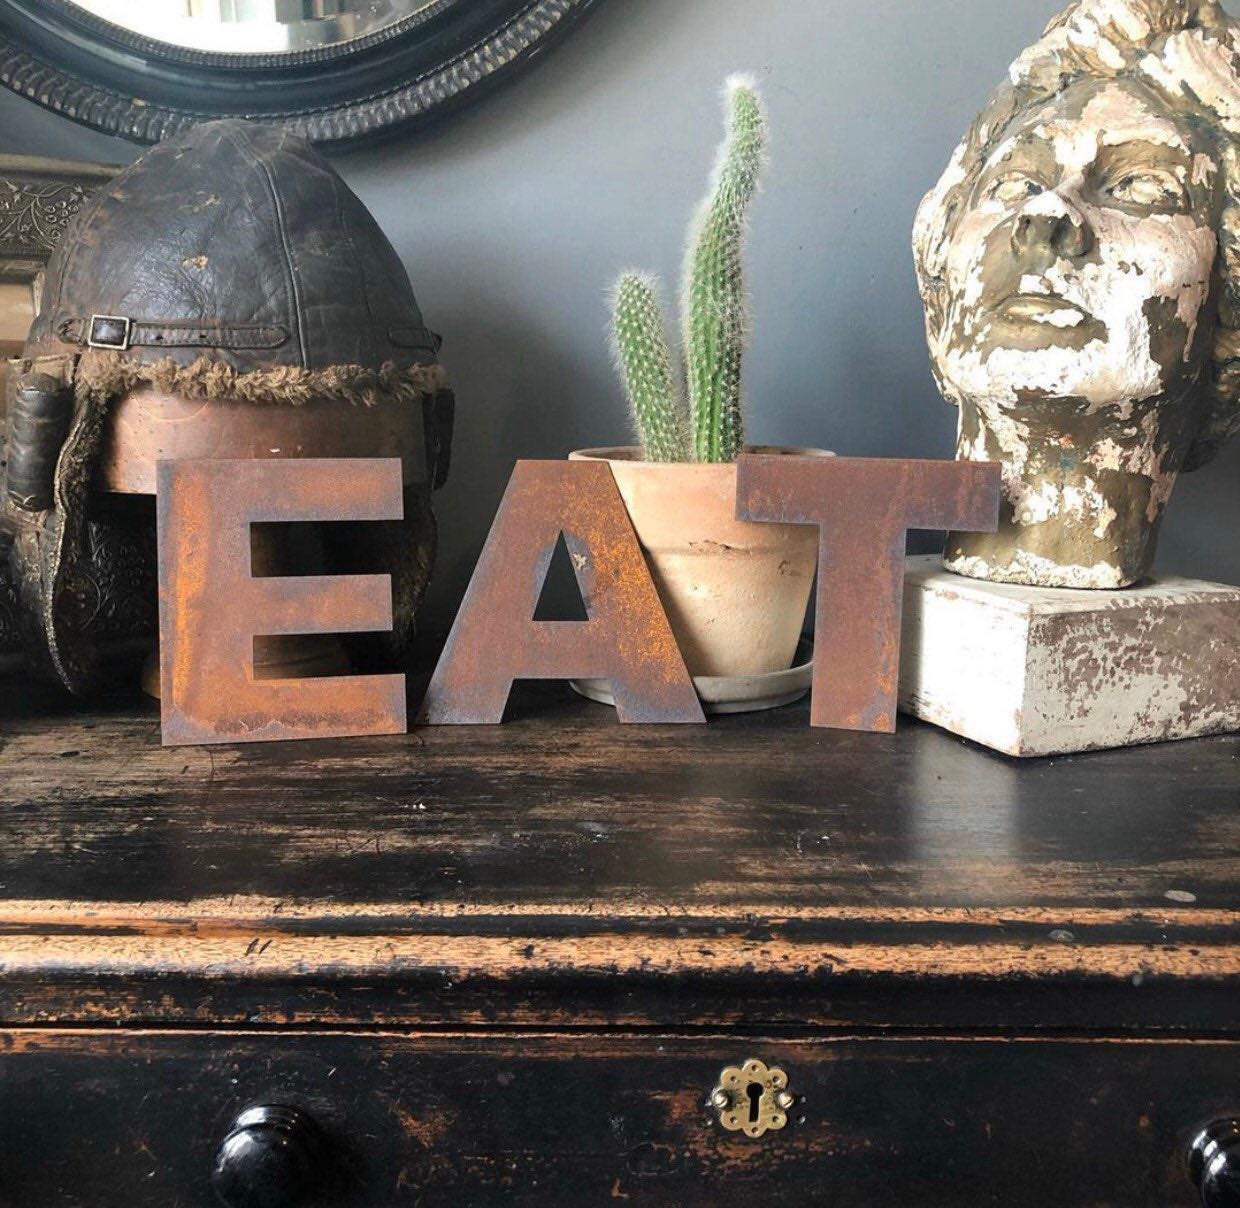 5" tall rusty metal industrial style lettering spelling out EAT